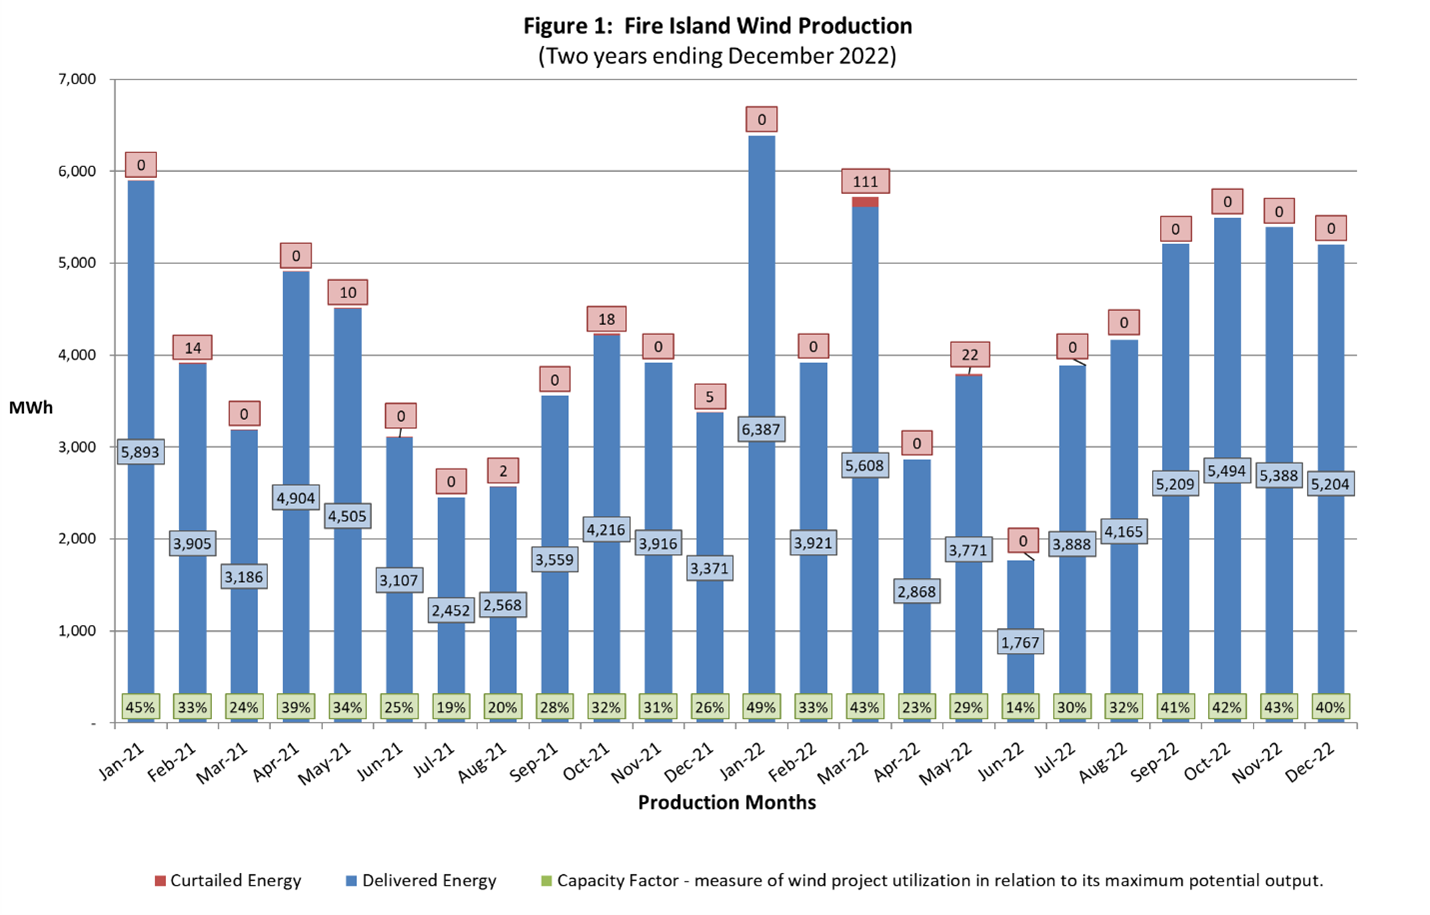 Monthly Fire Island Wind Production Graph January 2019 to December 2020